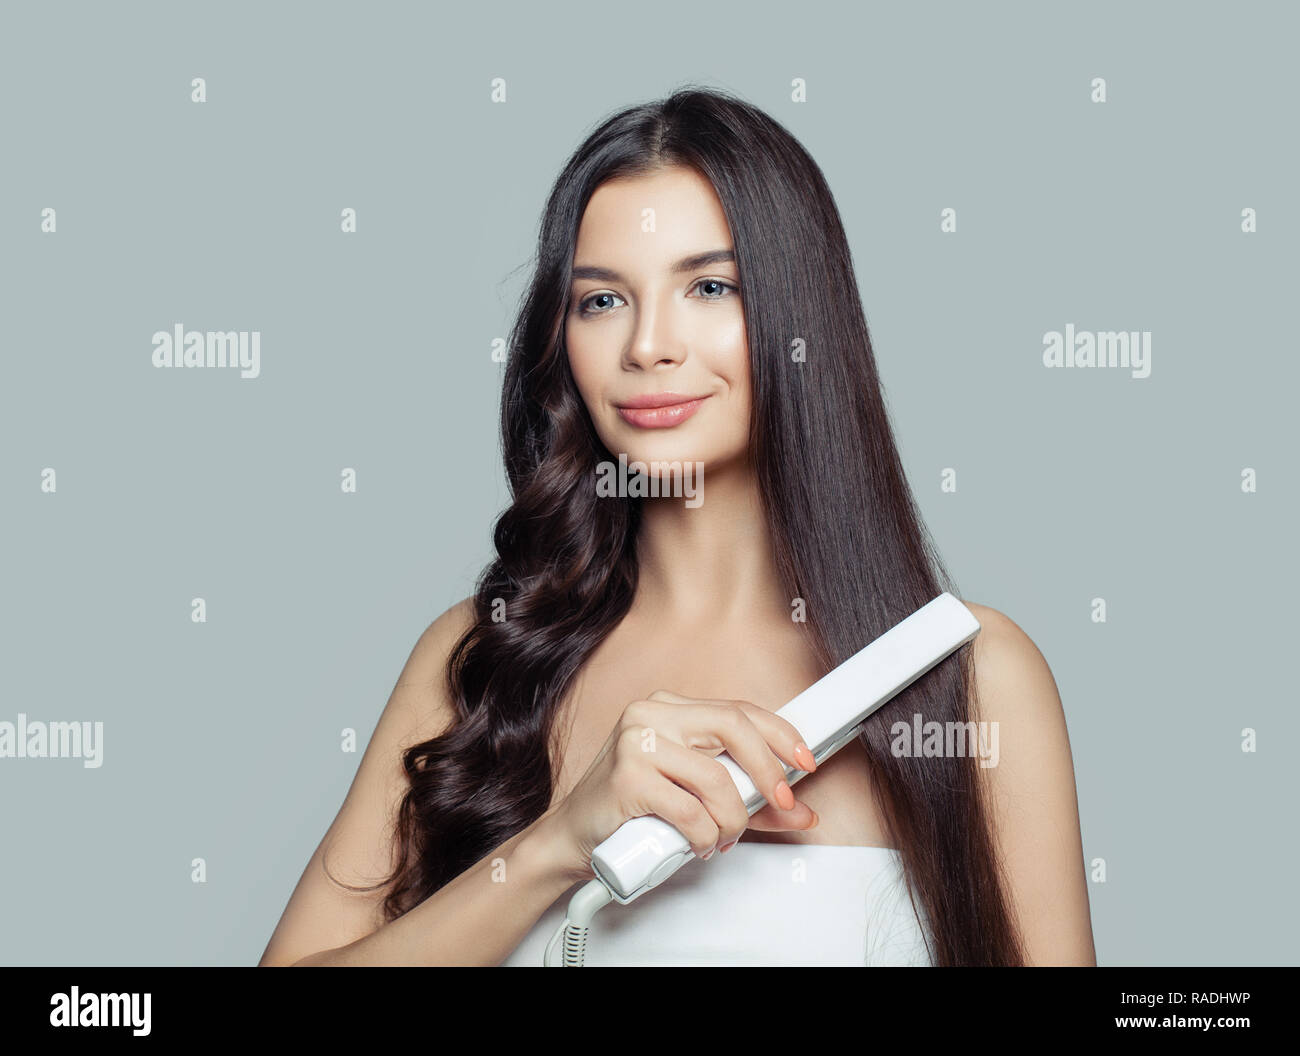 Beautiful woman with long straight hair and curly hair using hair straightener. Cute smiling girl straightening healthy brunette hairstyle with flat i Stock Photo